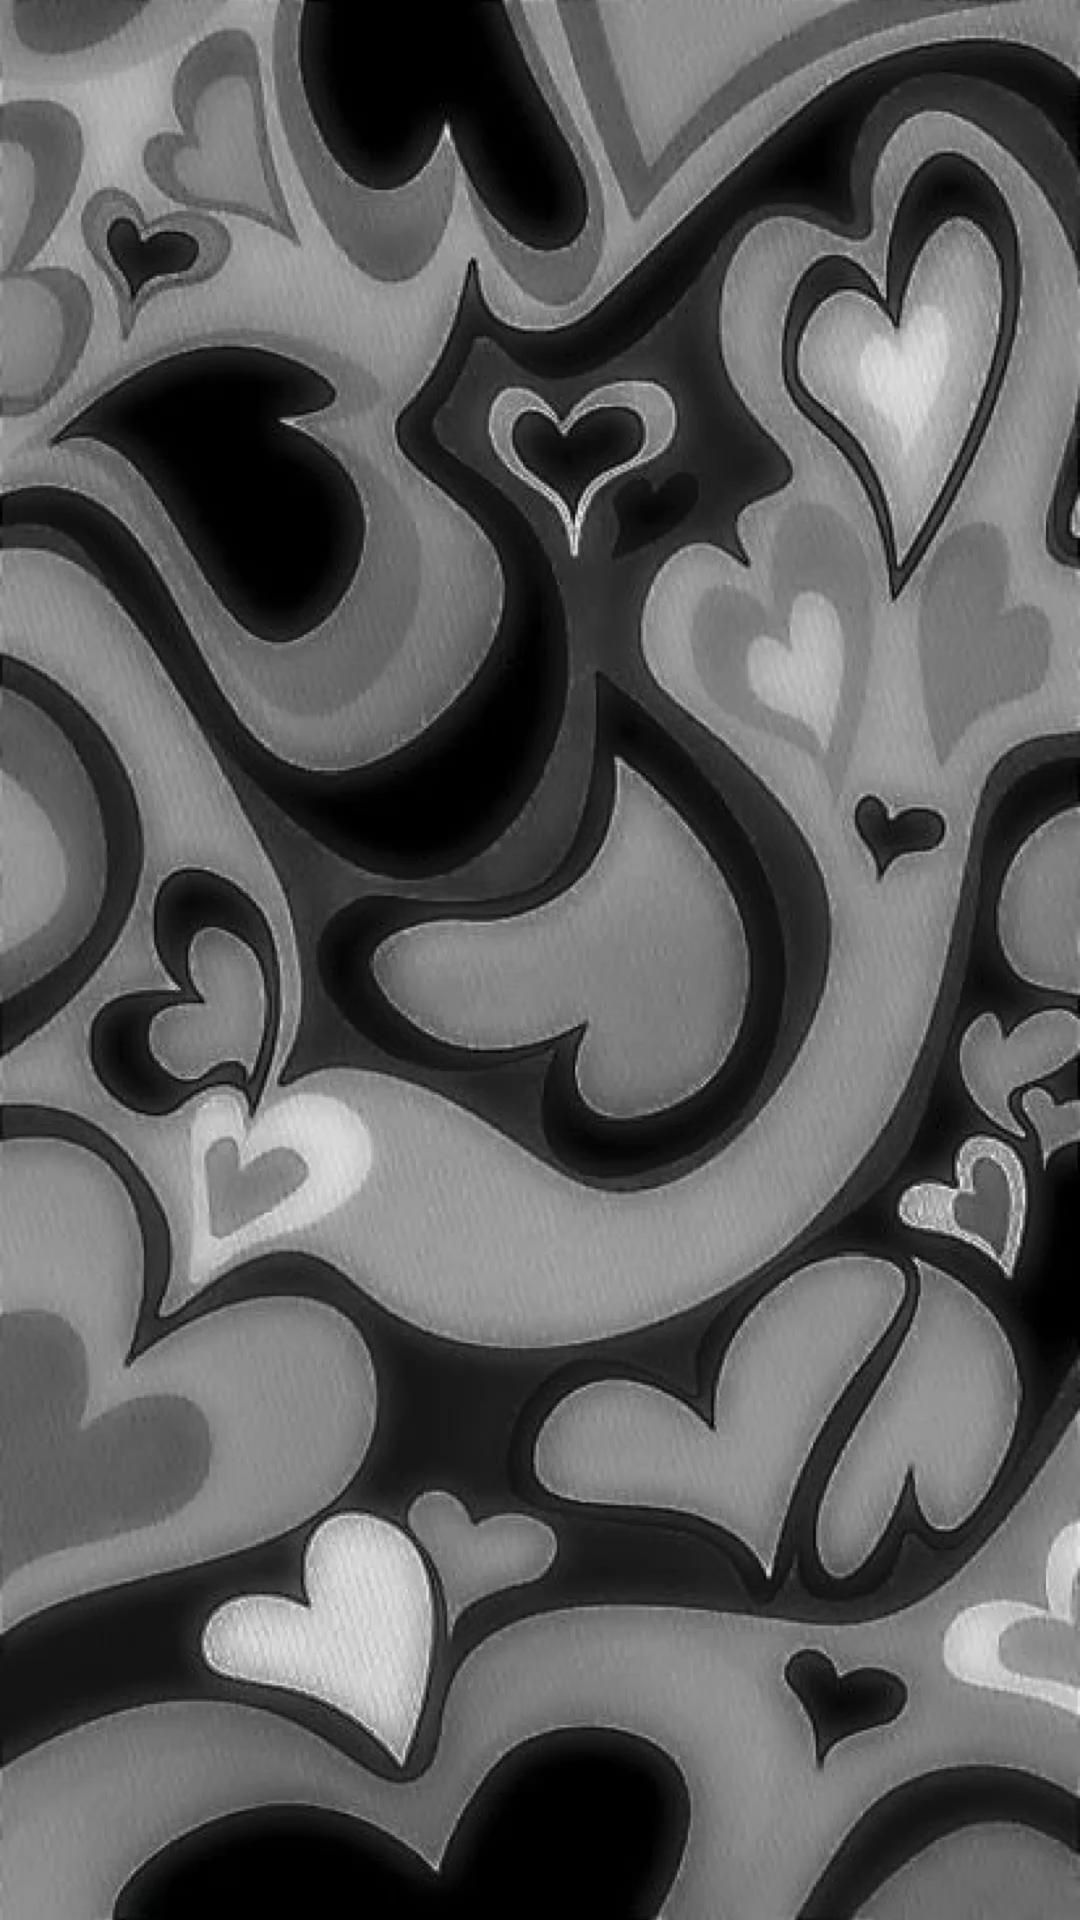 A black and white pattern of hearts and swirls - Black heart